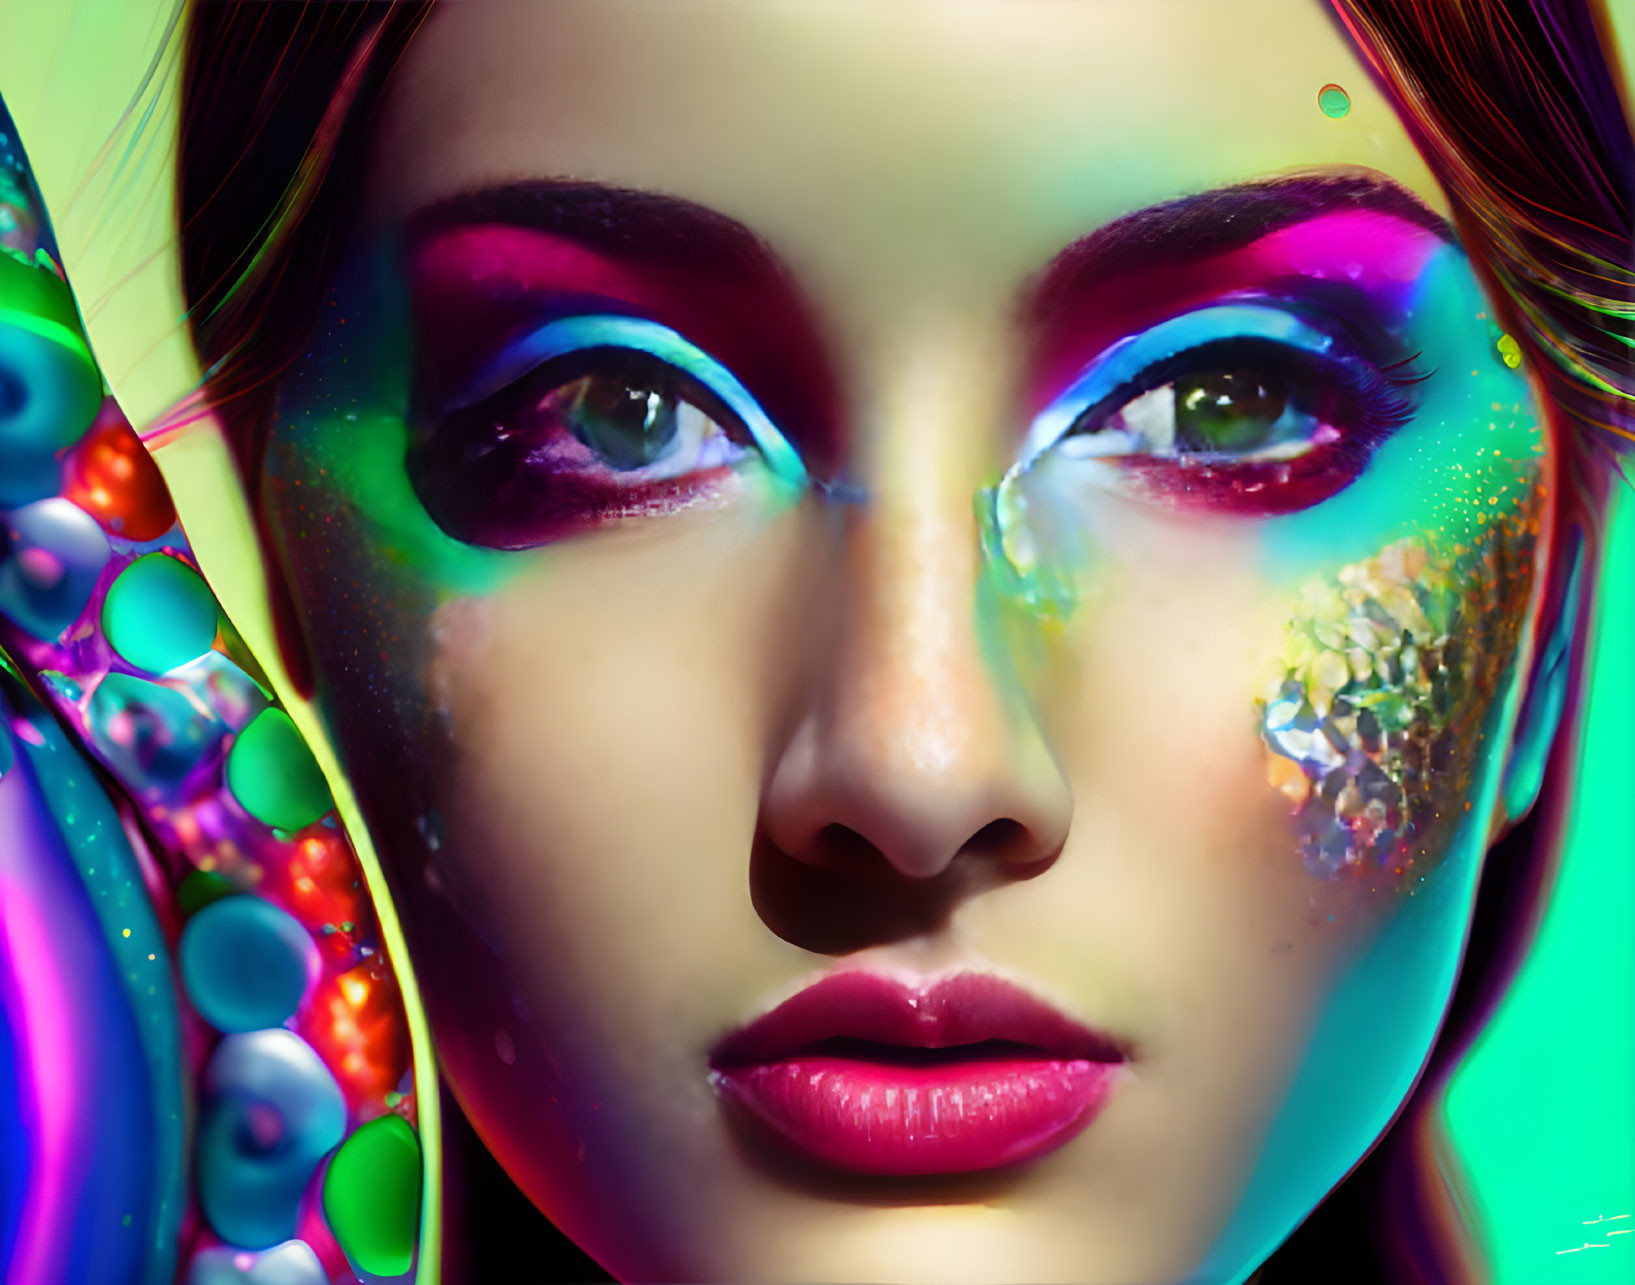 Vibrant colorful makeup with abstract bubble-like patterns on a woman's face